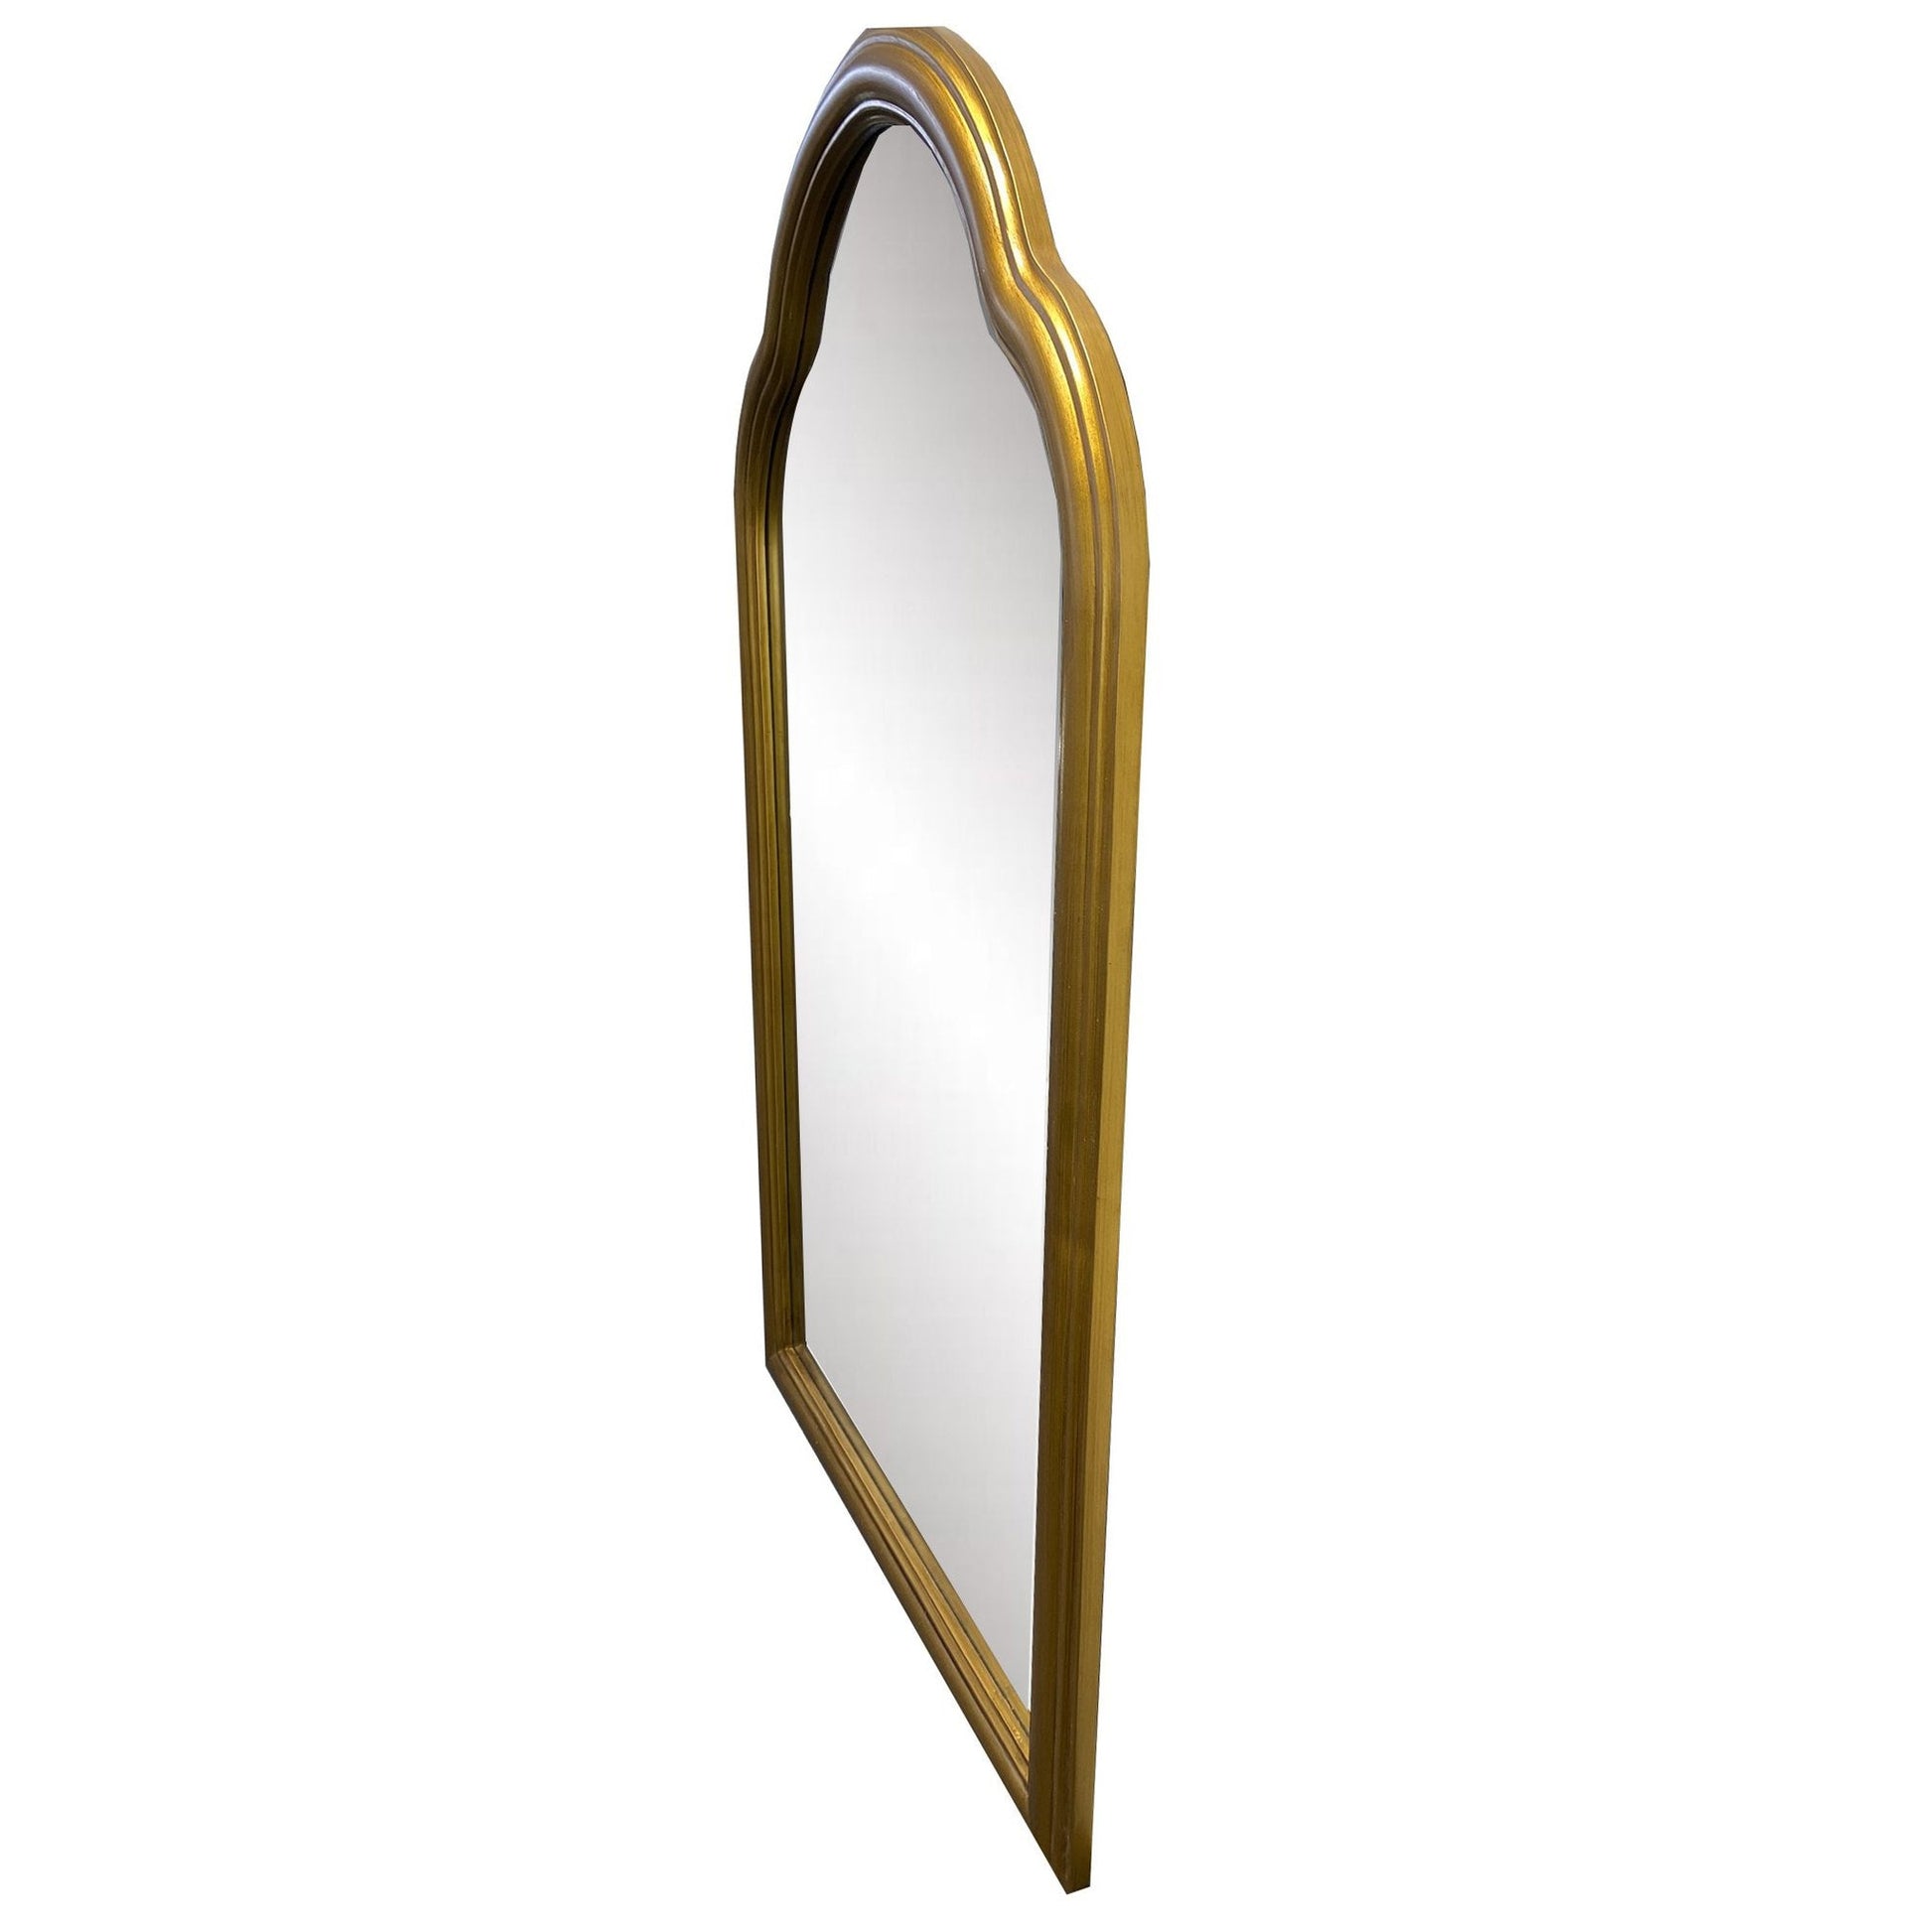 Benzara 40" Antique Gold Arched Top Handcrafted Metal Framed Accent Wall Mirror